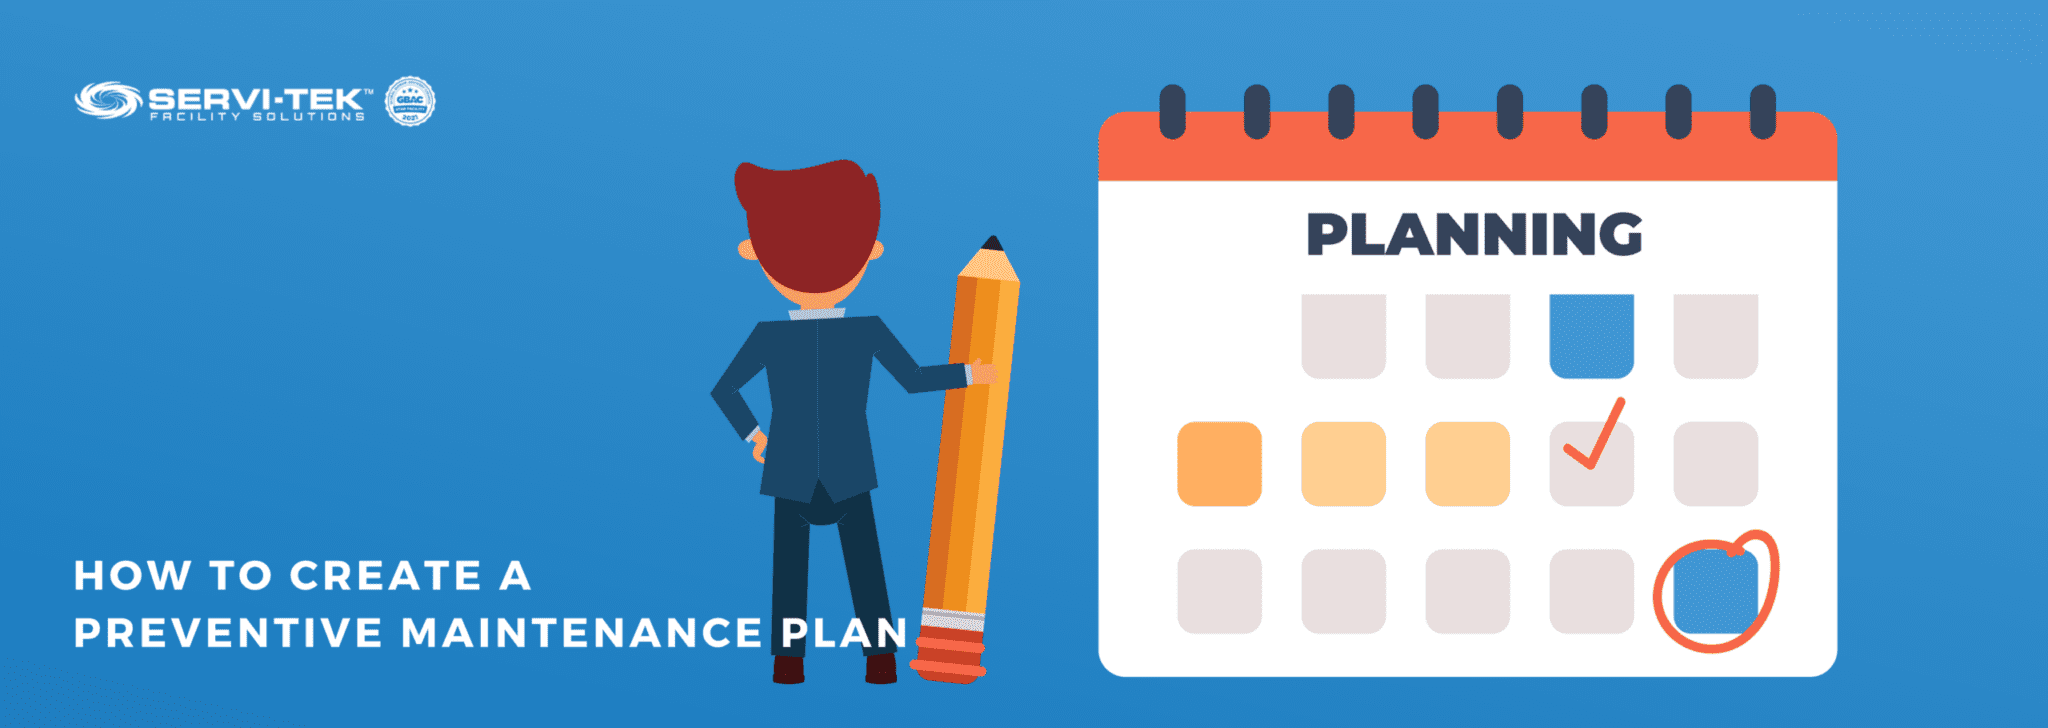 HOW TO CREATE A PREVENTIVE MAINTENANCE PLAN